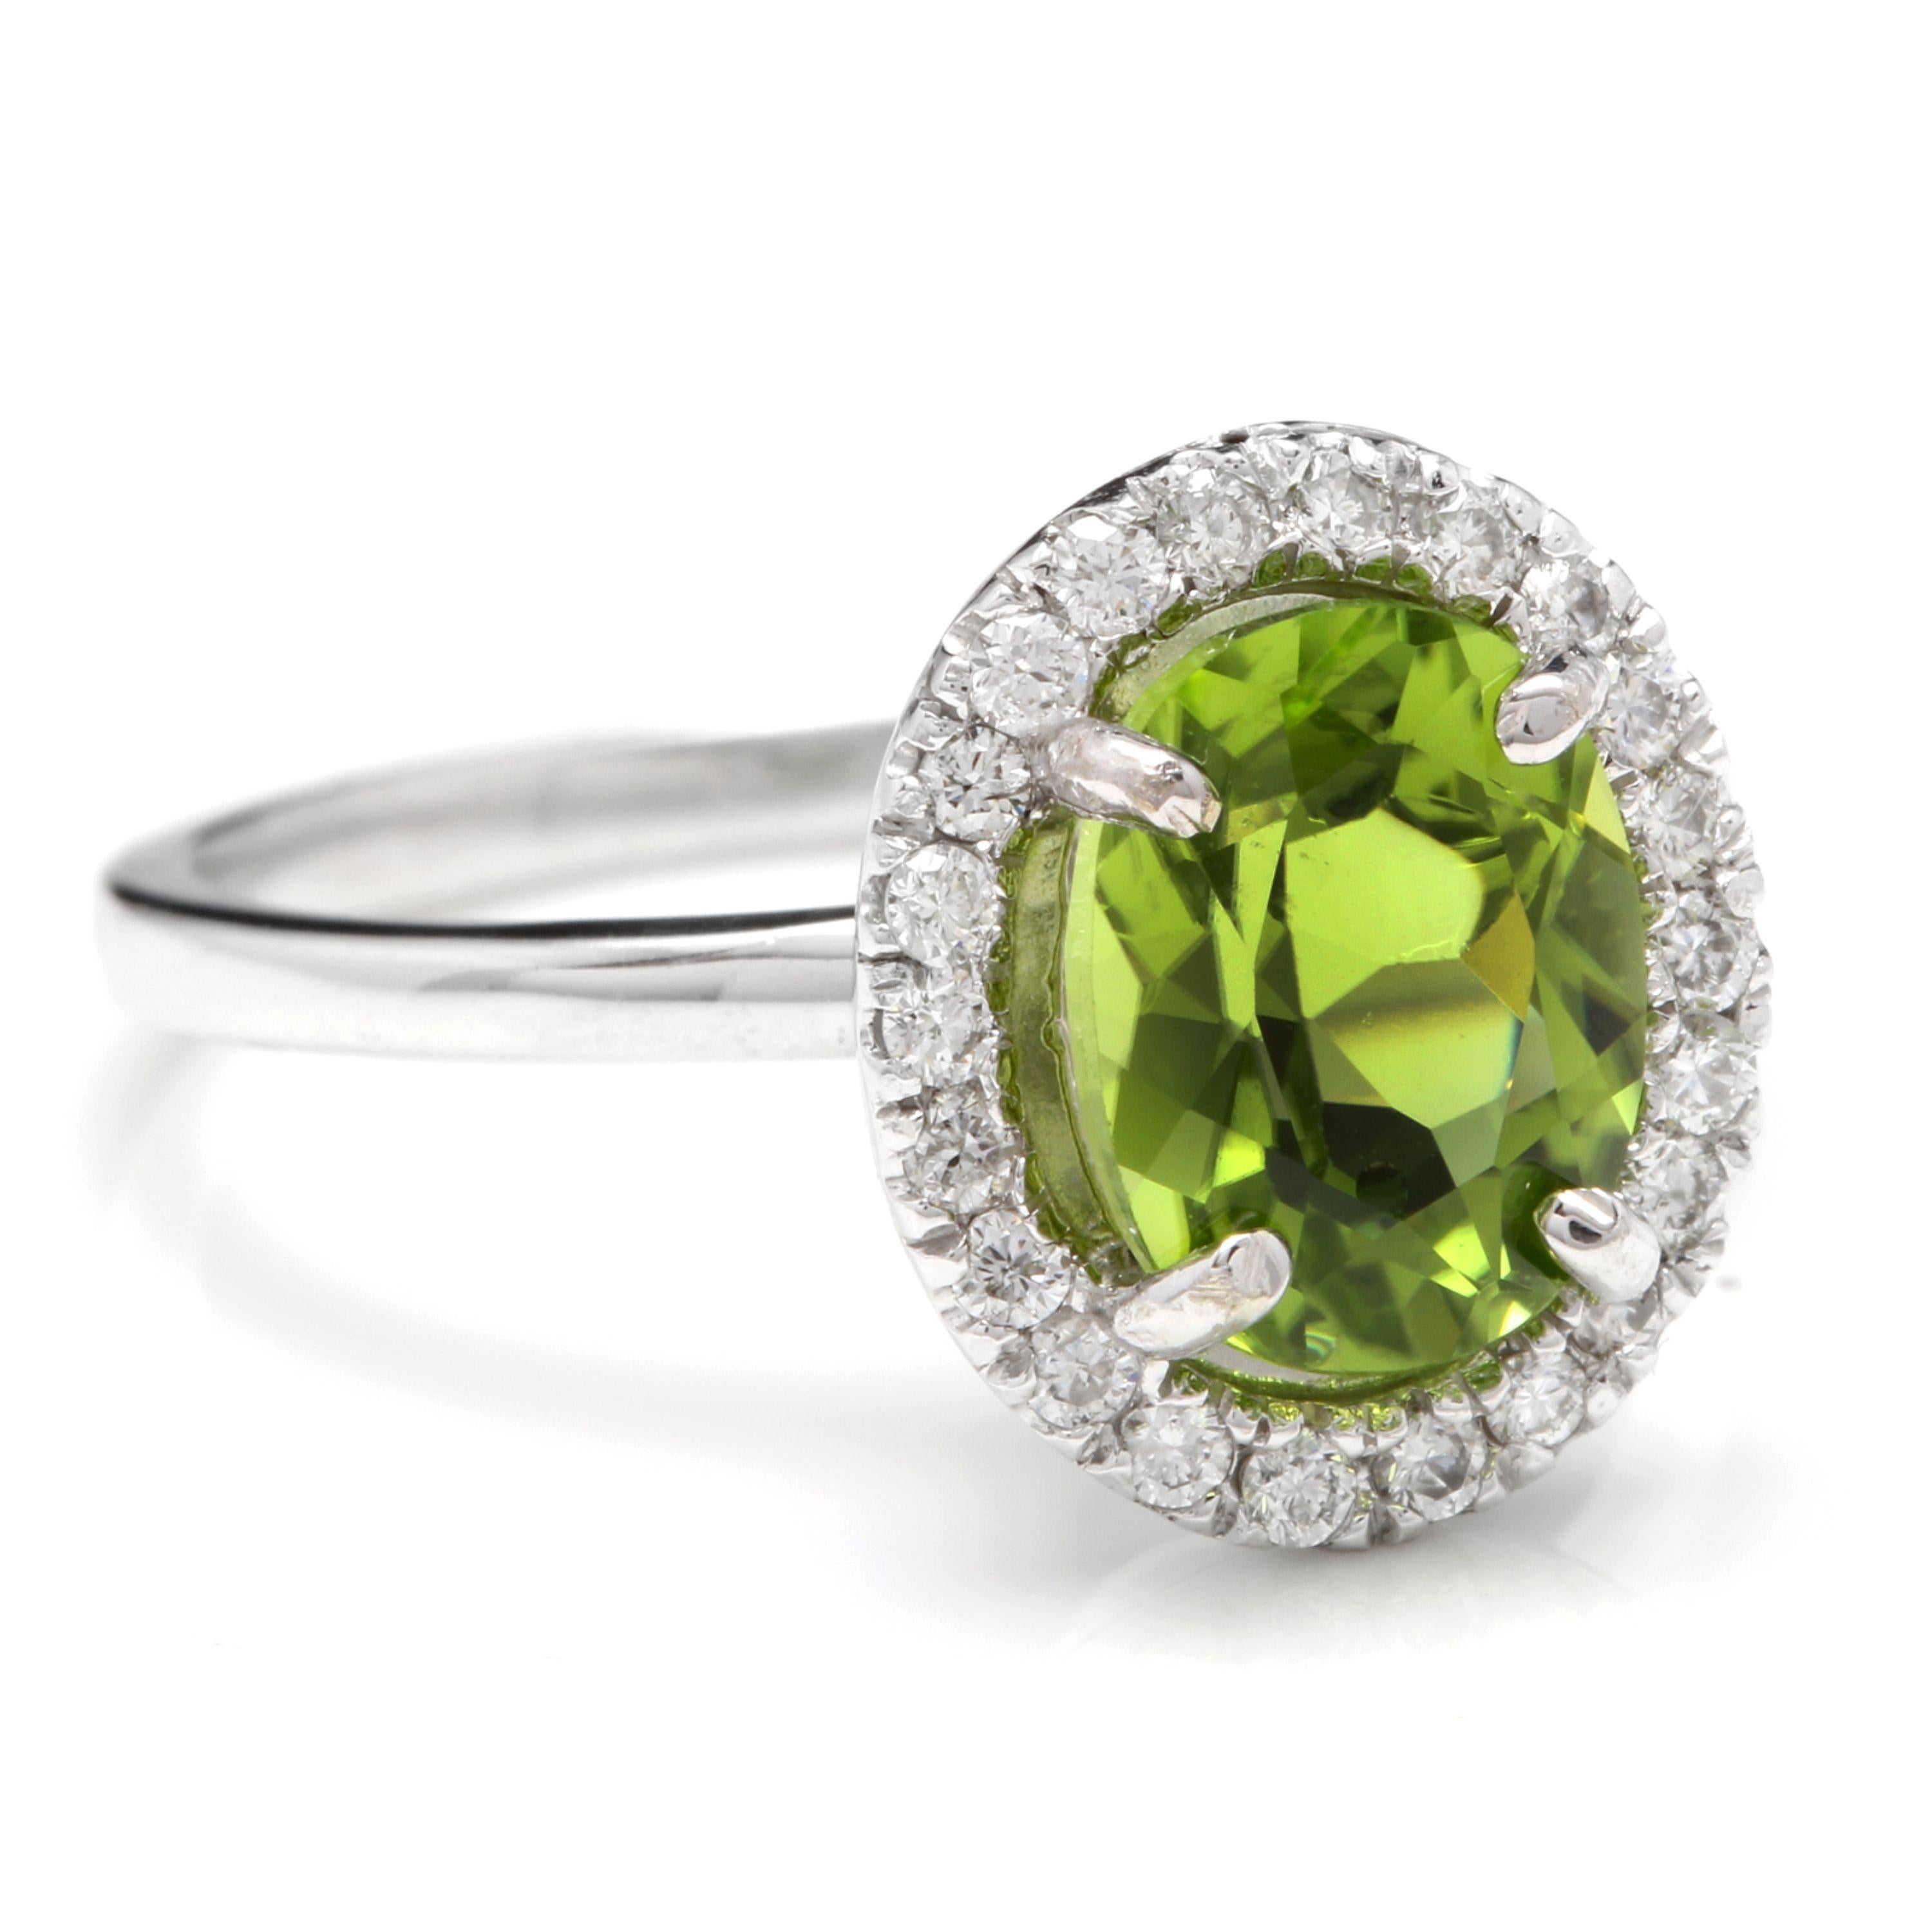 2.80 Carats Natural Very Nice Looking Peridot and Diamond 14K Solid White Gold Ring

Total Natural Oval Peridot Weight is: Approx. 2.50 Carats

Peridot Measures: Approx. 9.00 x 7.00mm

Natural Round Diamonds Weight: Approx. 0.30 Carats (color G-H /